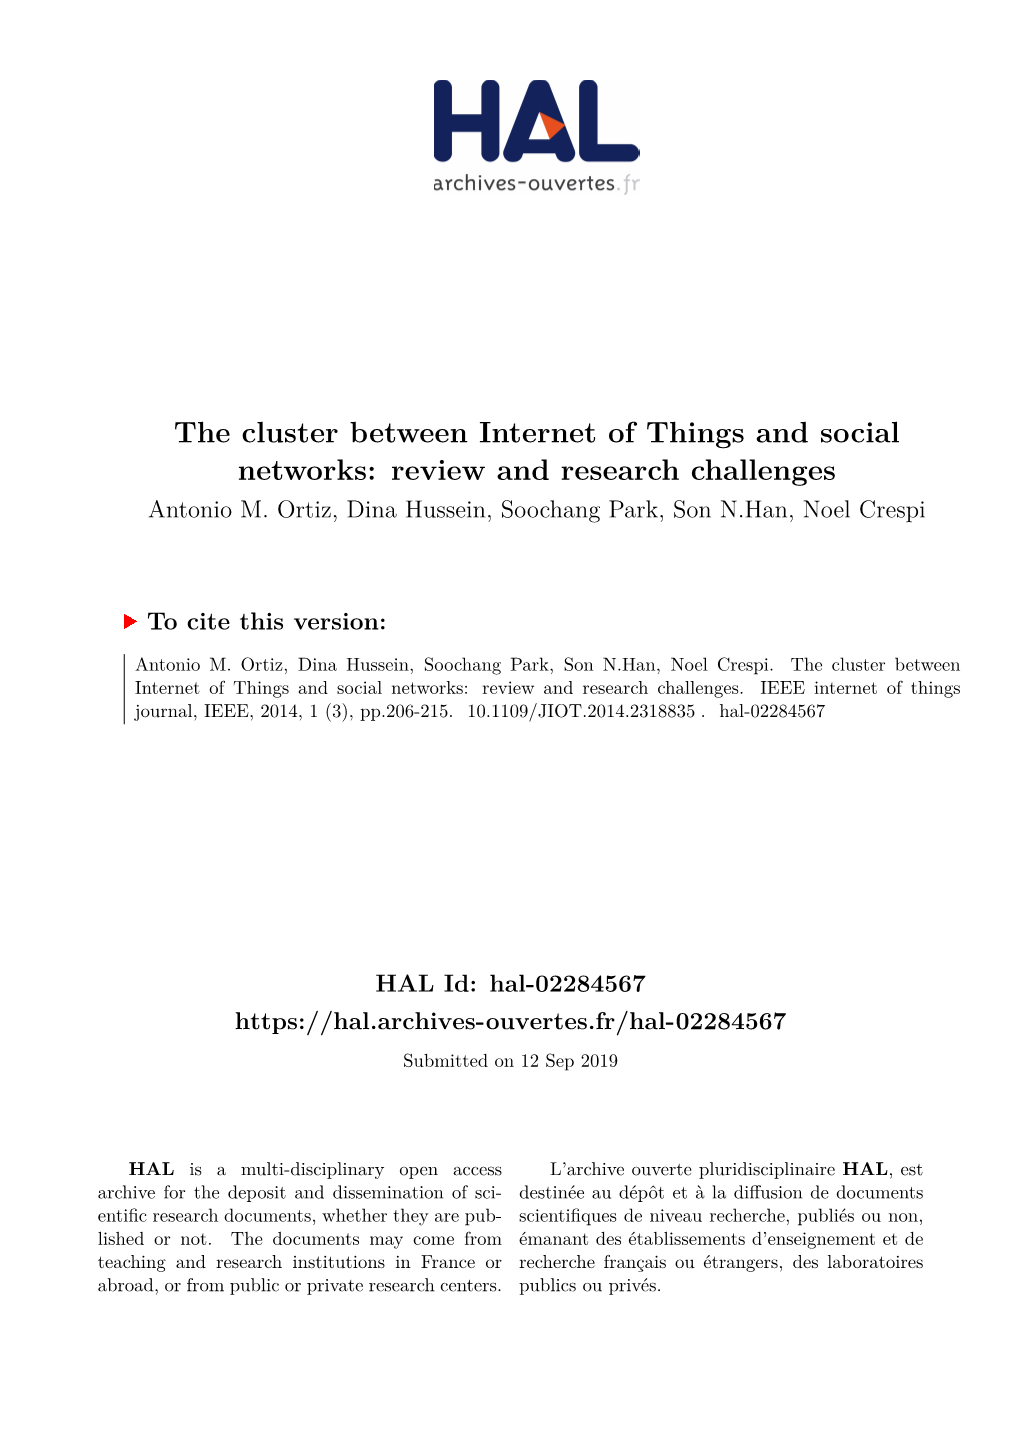 The Cluster Between Internet of Things and Social Networks: Review and Research Challenges Antonio M